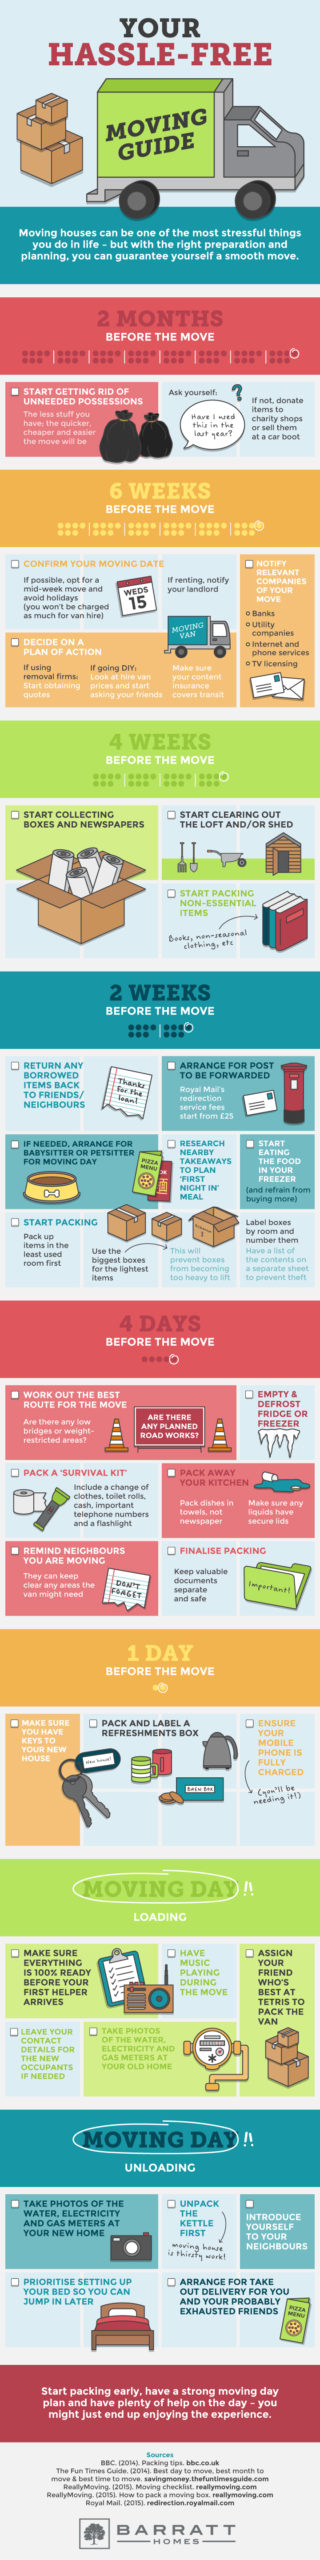 The Complete Guide To Moving House [Infographic]